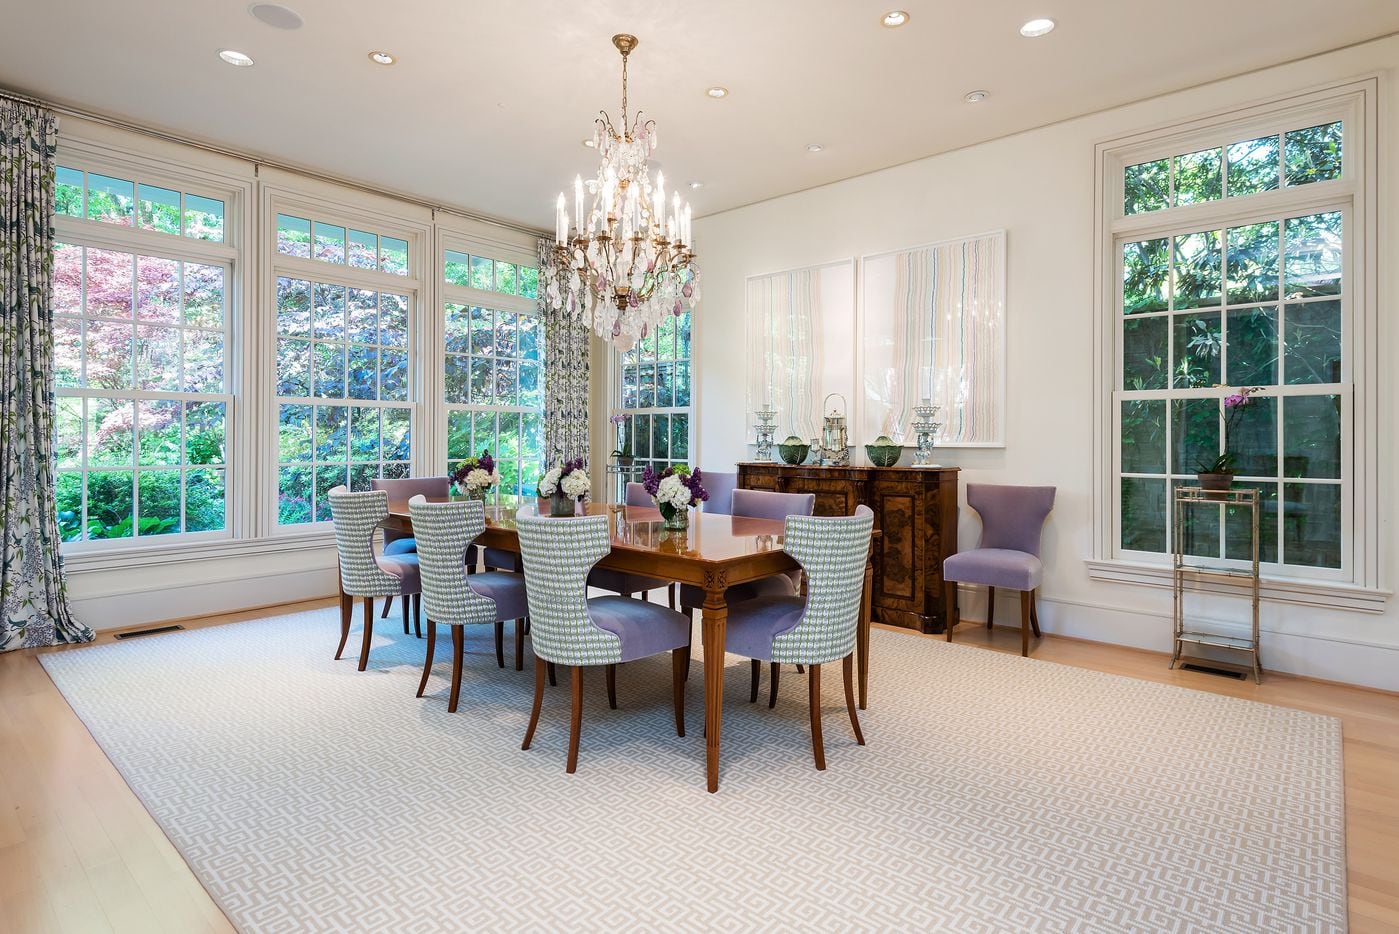 Take a look at the formal dining room at 9024 Broken Arrow Lane in Dallas.